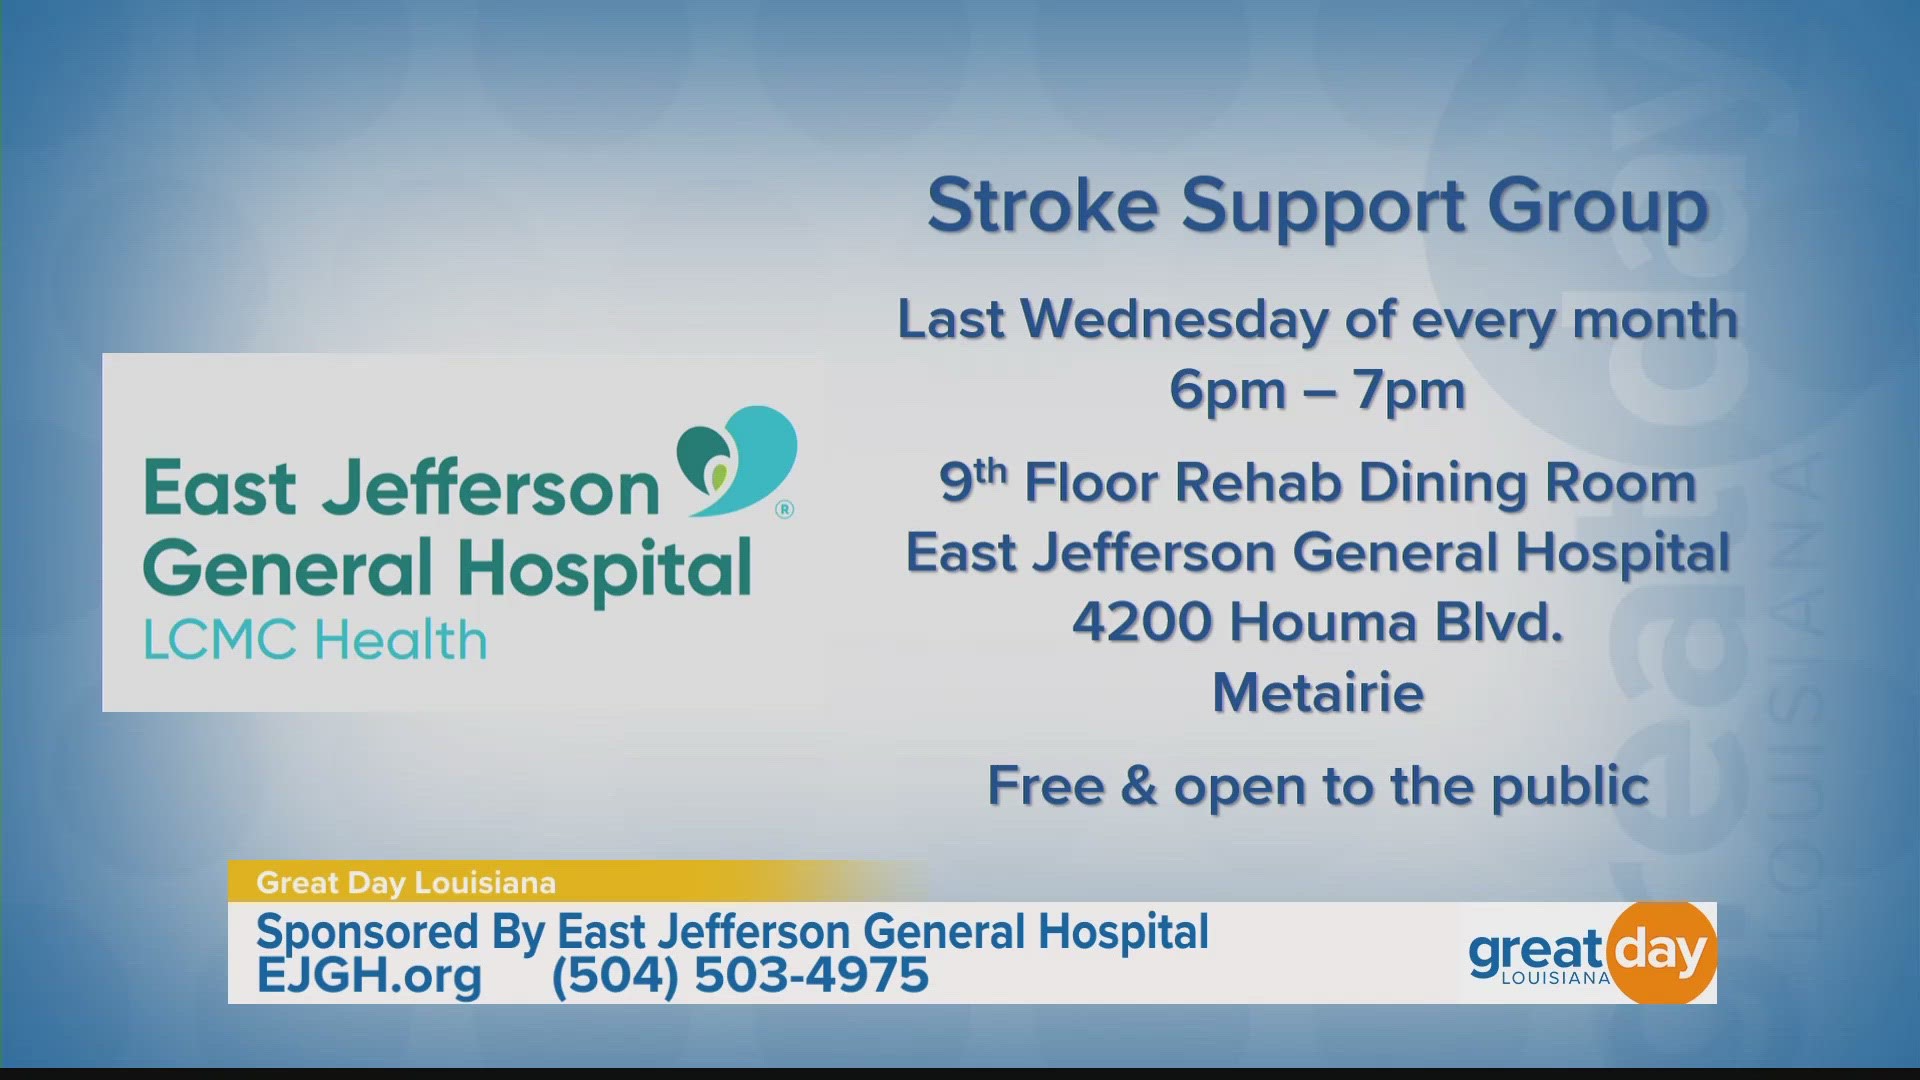 The East Jefferson General Hospital Stroke Support Group is open to the public and meets the last Wednesday of every month. Call 504-503-4975 for more information.